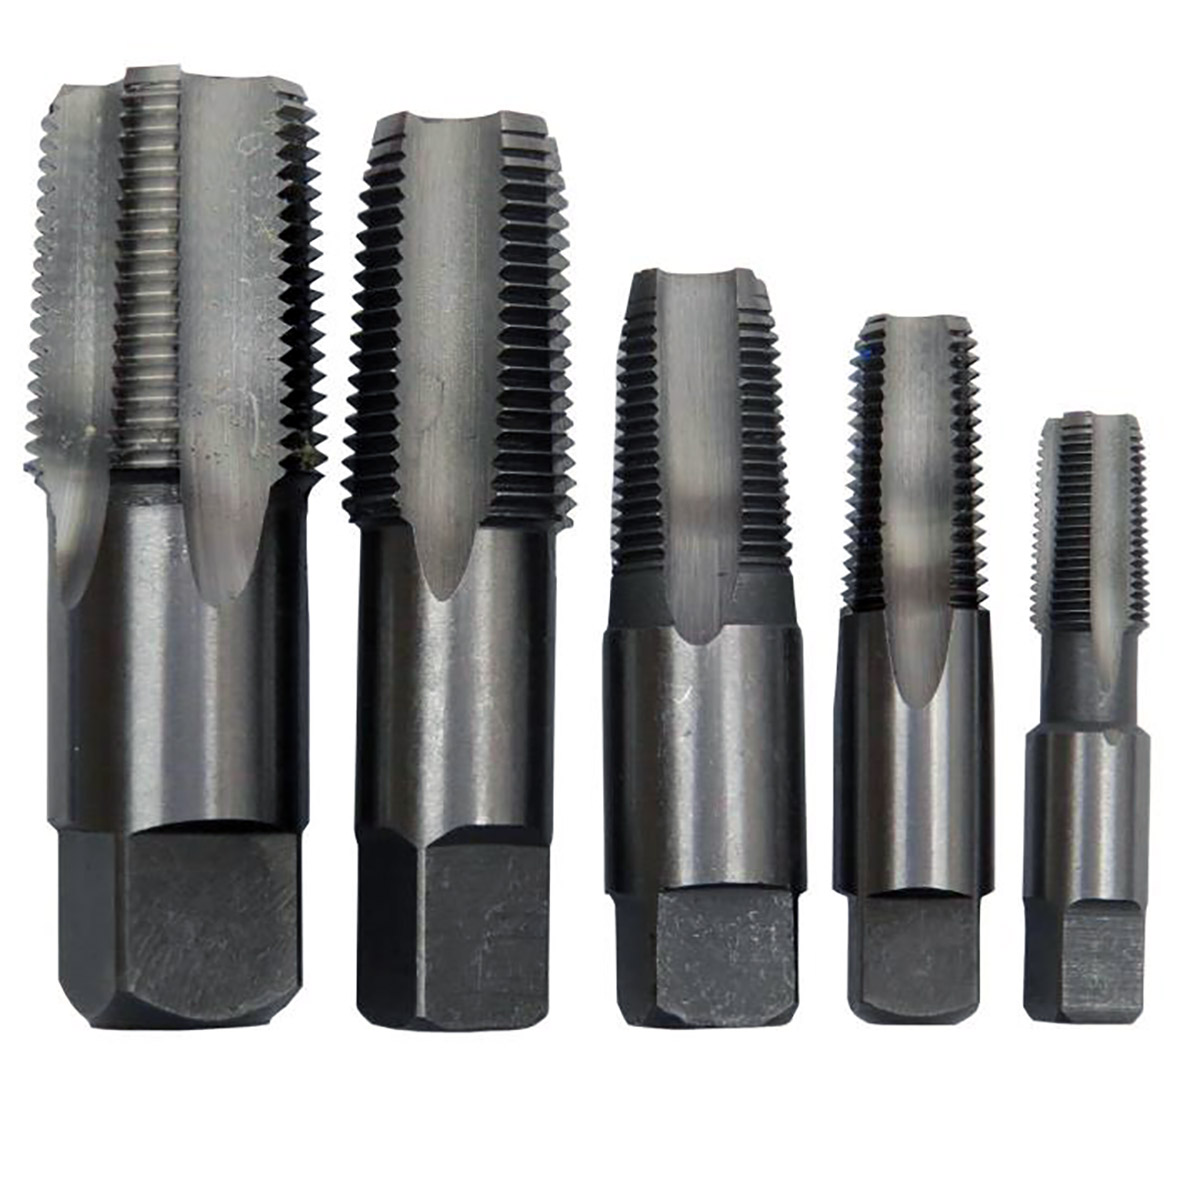 DRILL AMERICA POUCSNPT5 AMERICA Carbon Steel NPT Pipe Tap Set In Carry Pouch 1/8” - 3/4” (5 Piece Set)